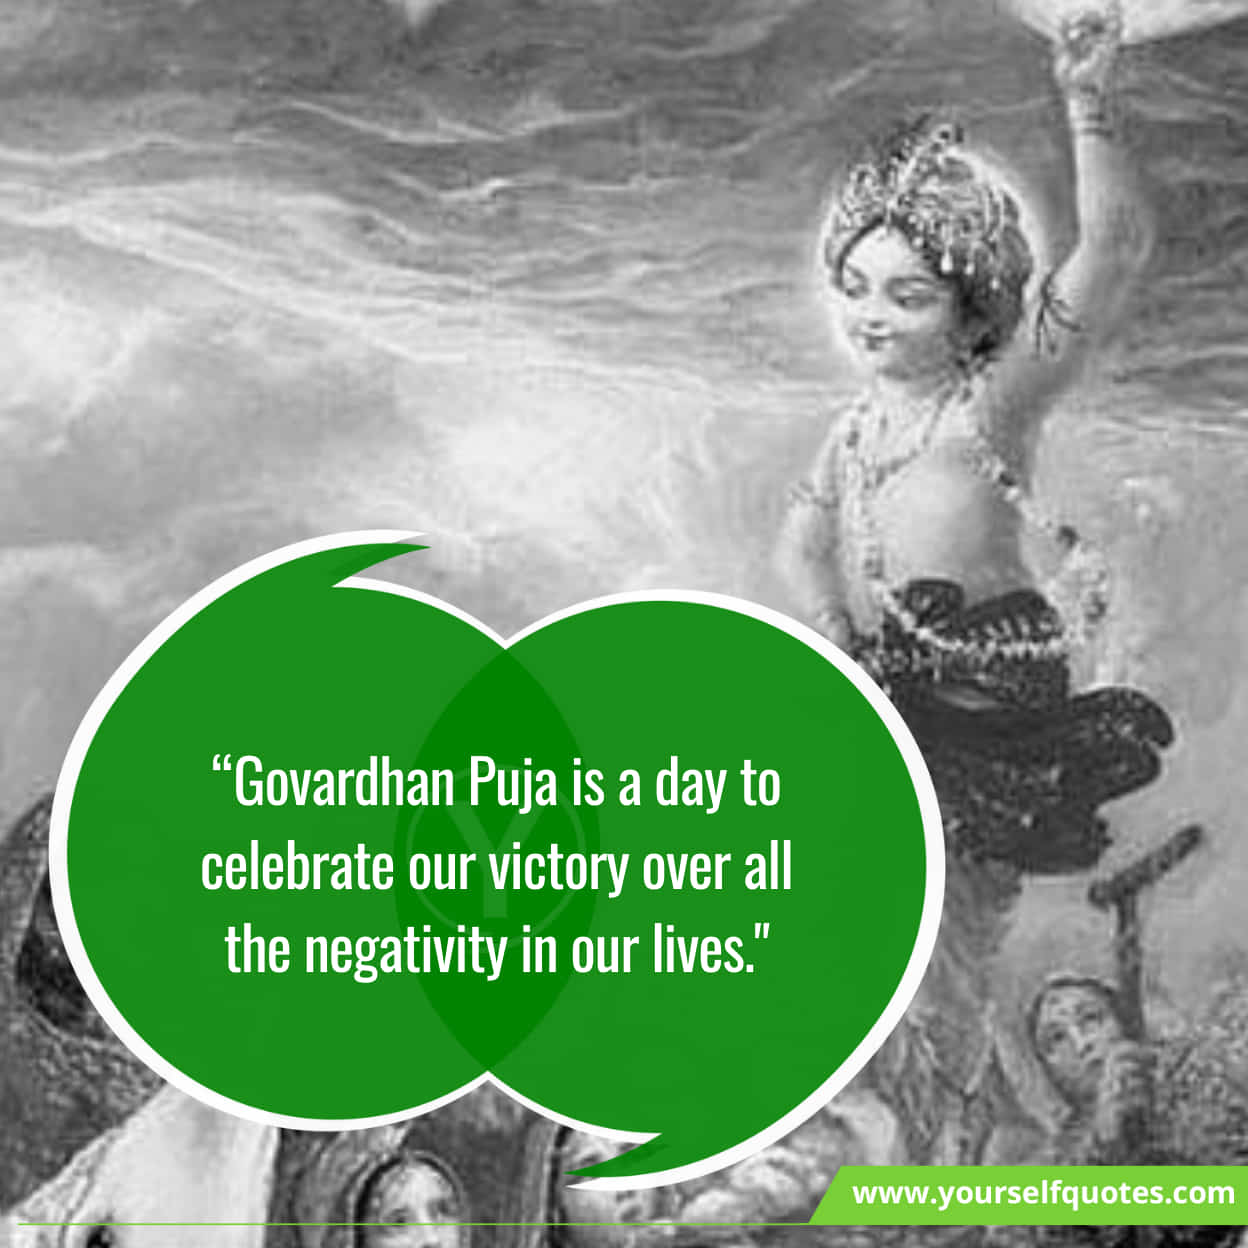 Quotes On Govardhan Puja